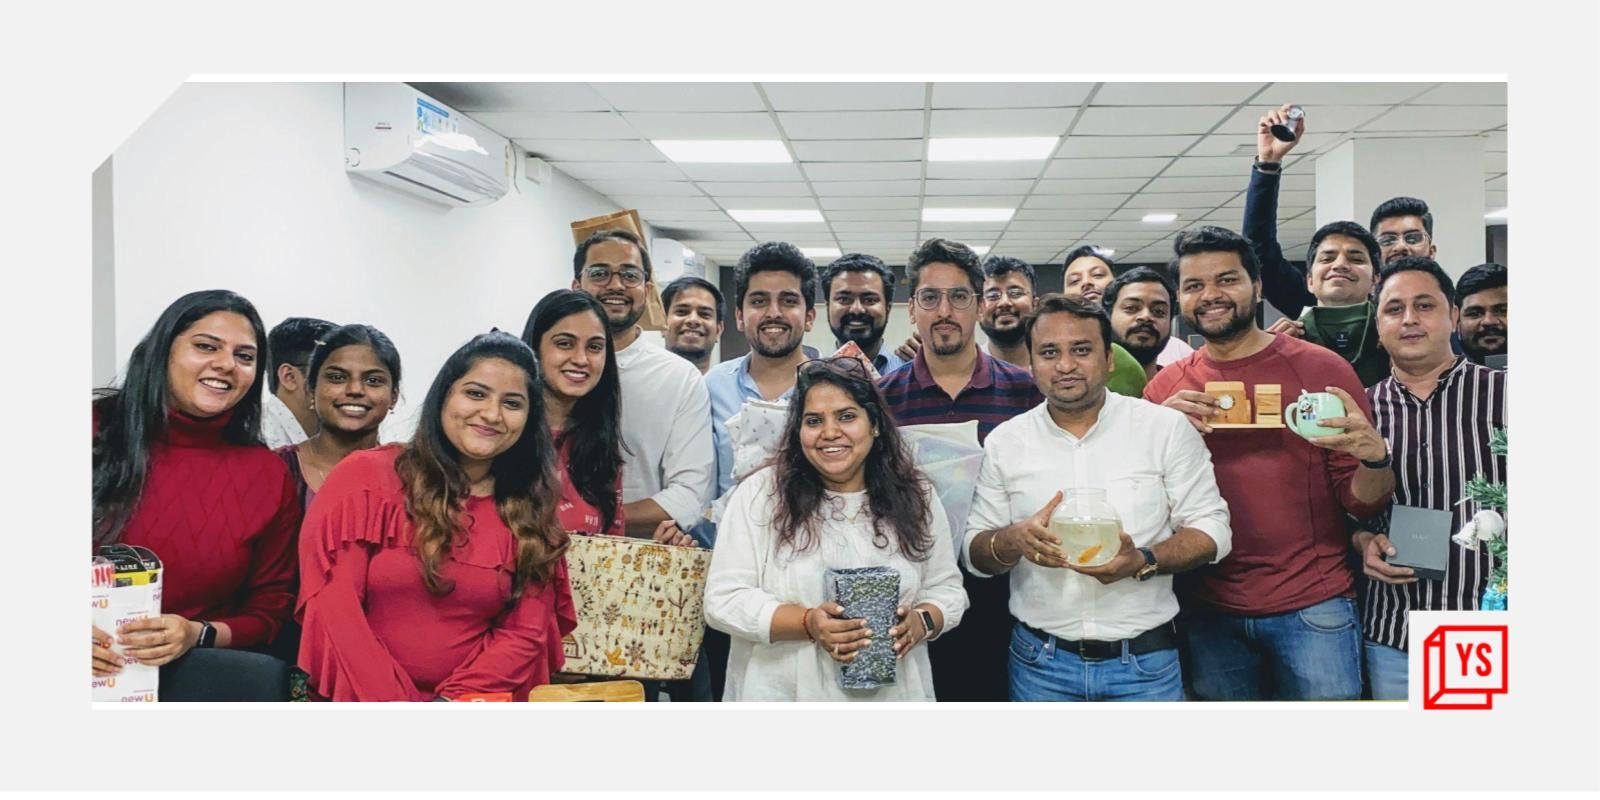 [Funding alert] Dental care startup Smiles.ai raises $23M in Series A investment